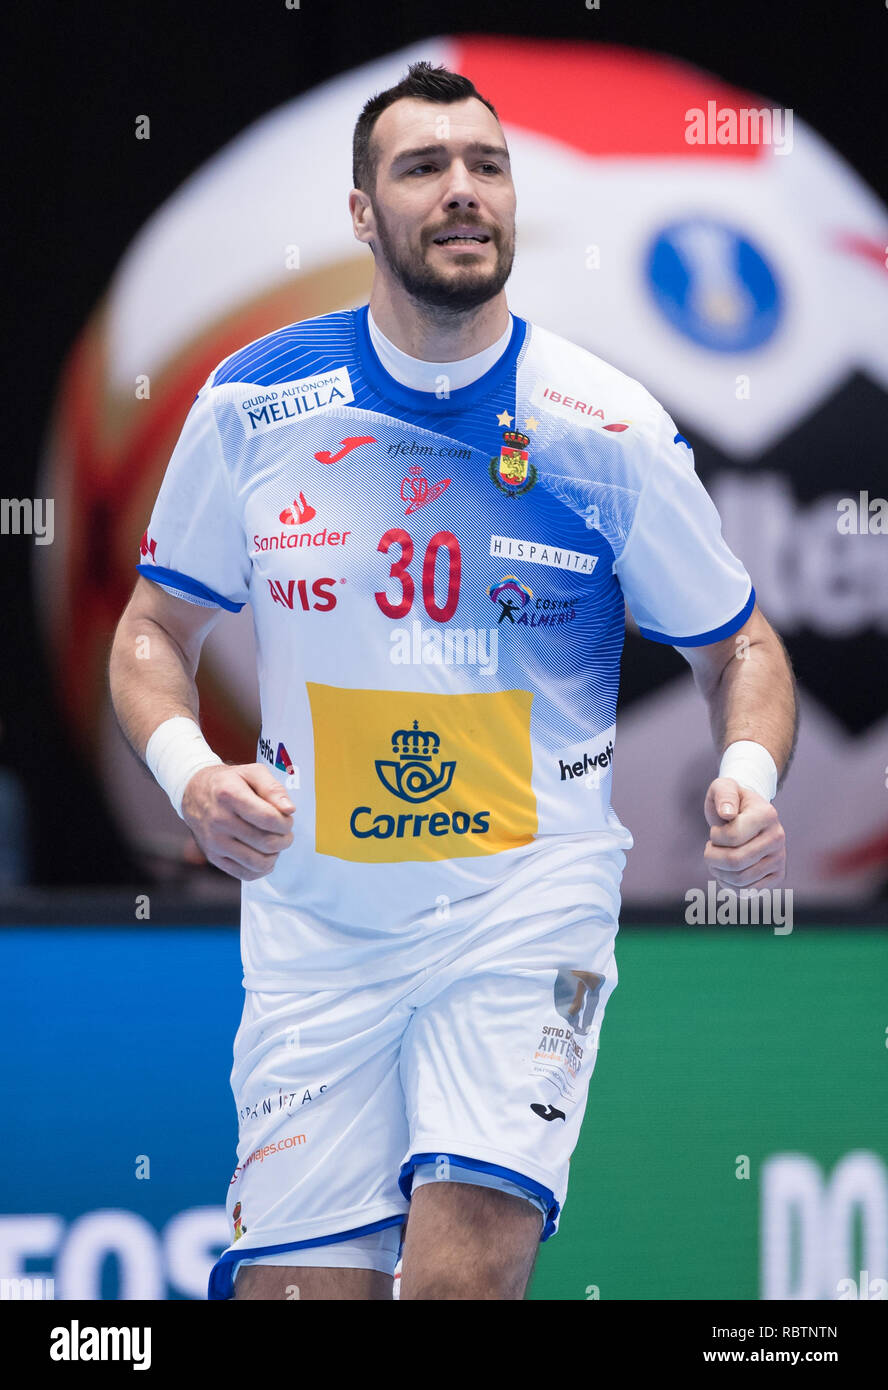 11 January 2019, Bavaria, München: Handball: World Championship, Bahrain - Spain, preliminary round, Group B, 1st matchday in the Olympic Hall. Gedeon Guardiola of Spain cheers for a goal. Photo: Sven Hoppe/dpa Stock Photo